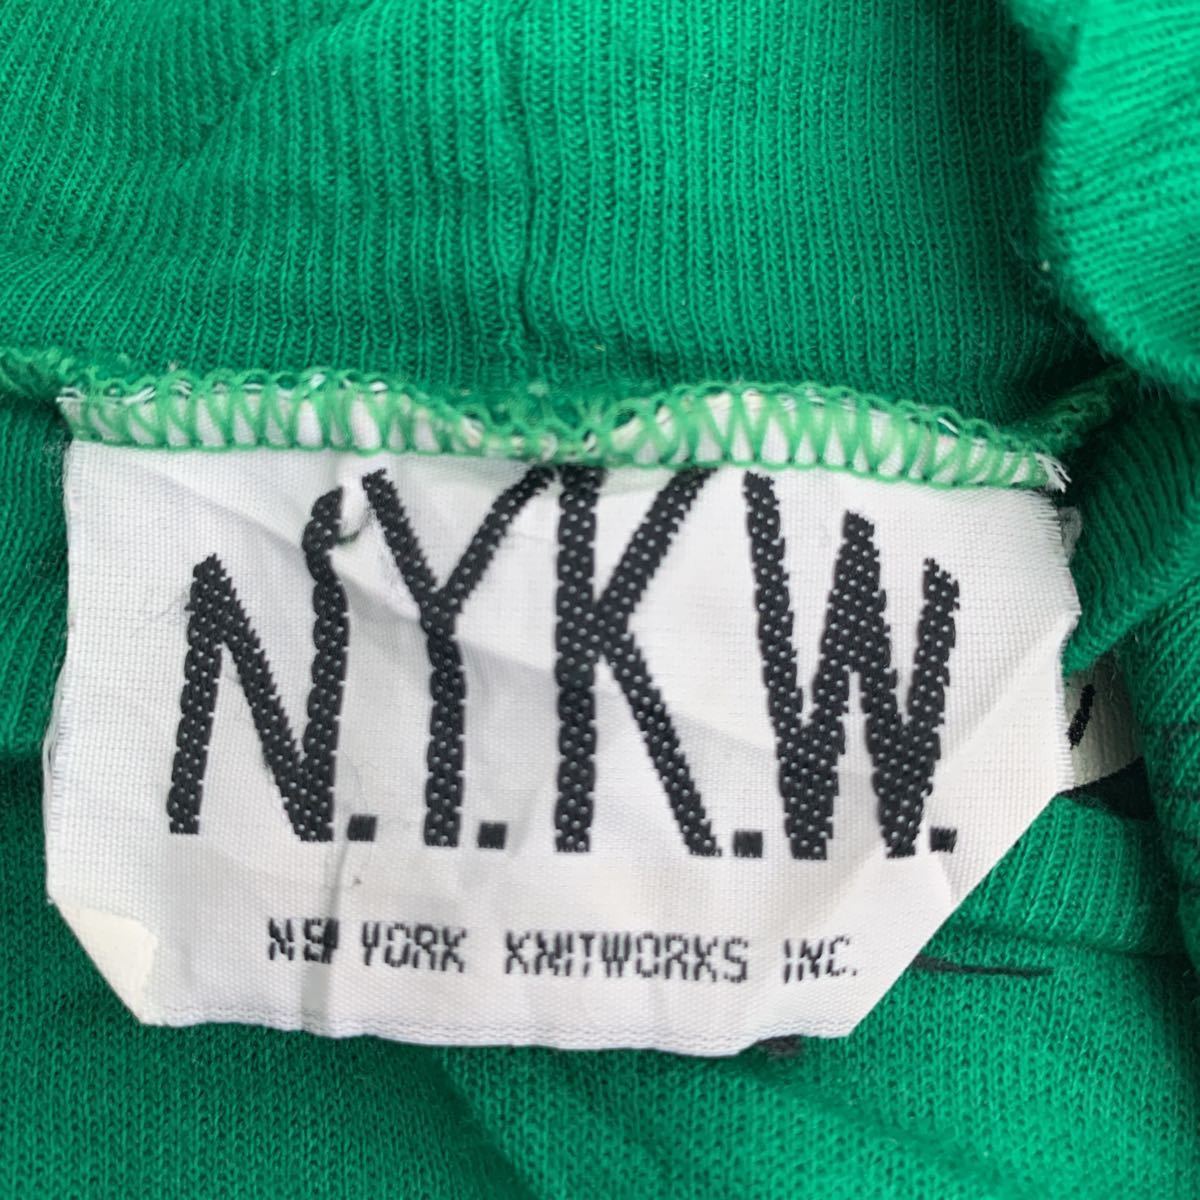 N.Y.K.W. sweat sweatshirt lady's S~M size about Christmas pattern green old clothes . America buying up t2203-3268